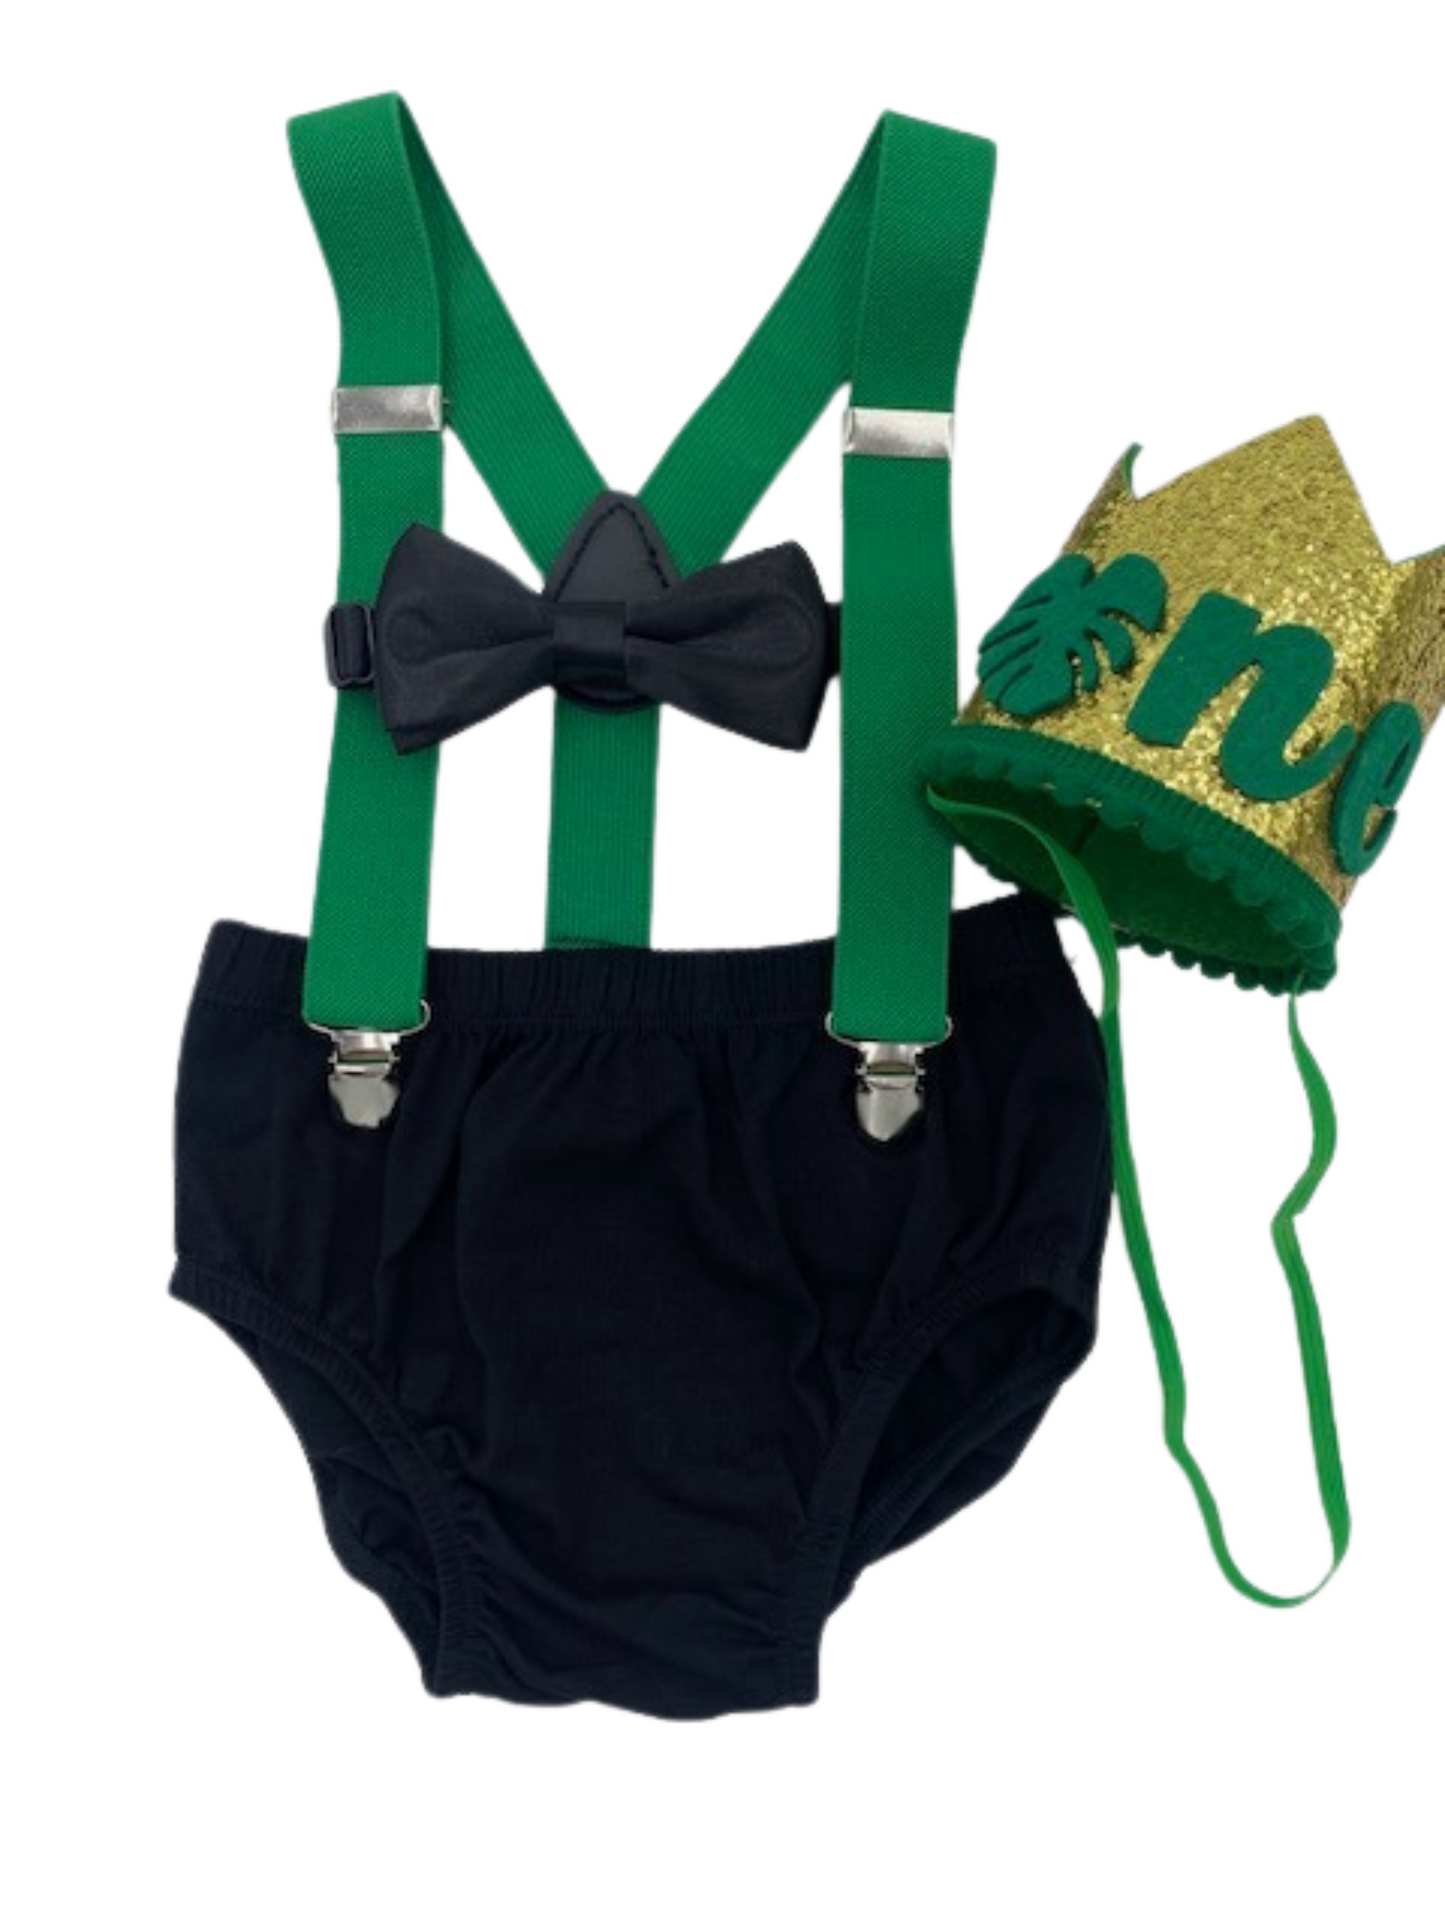 Green and black Cake Smash Outfit